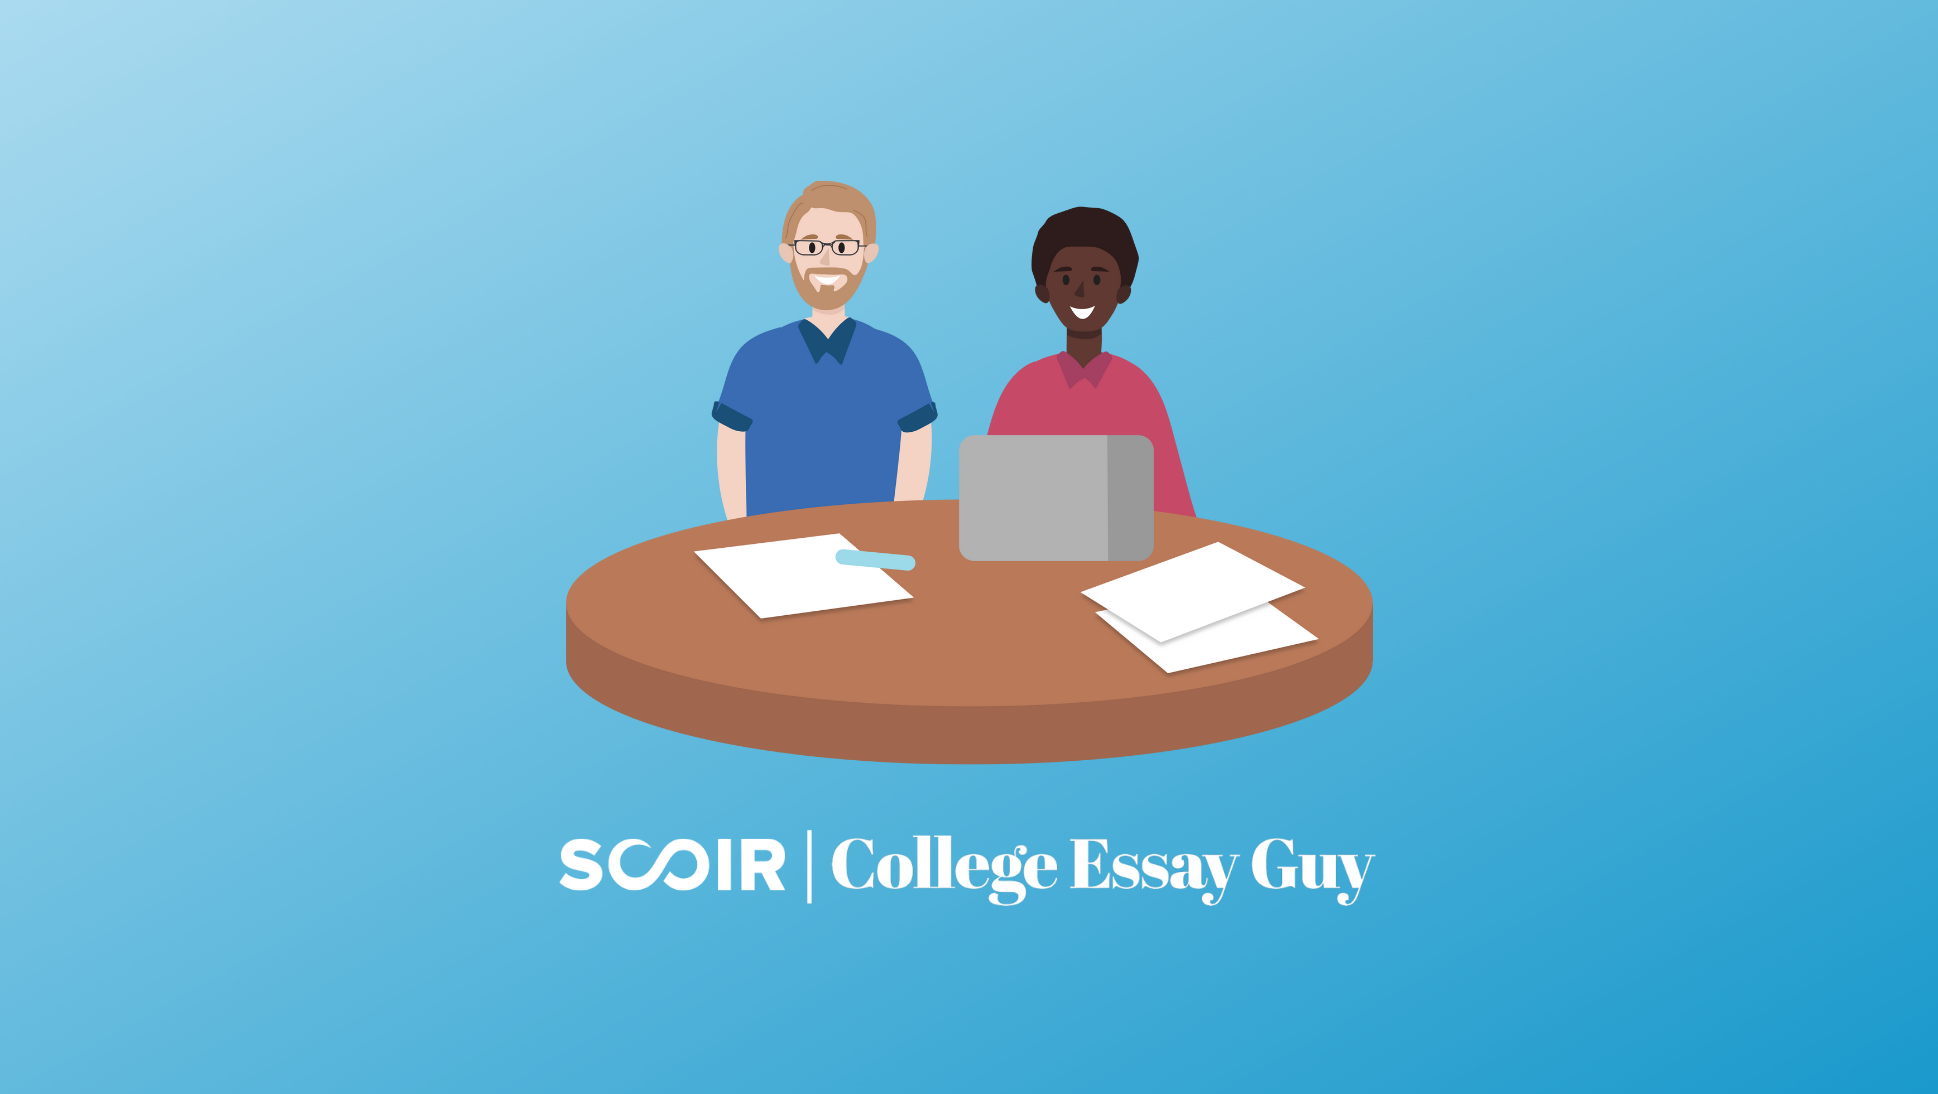 5 Biggest Tips on How to Stand Out on Your College Essay This Fall